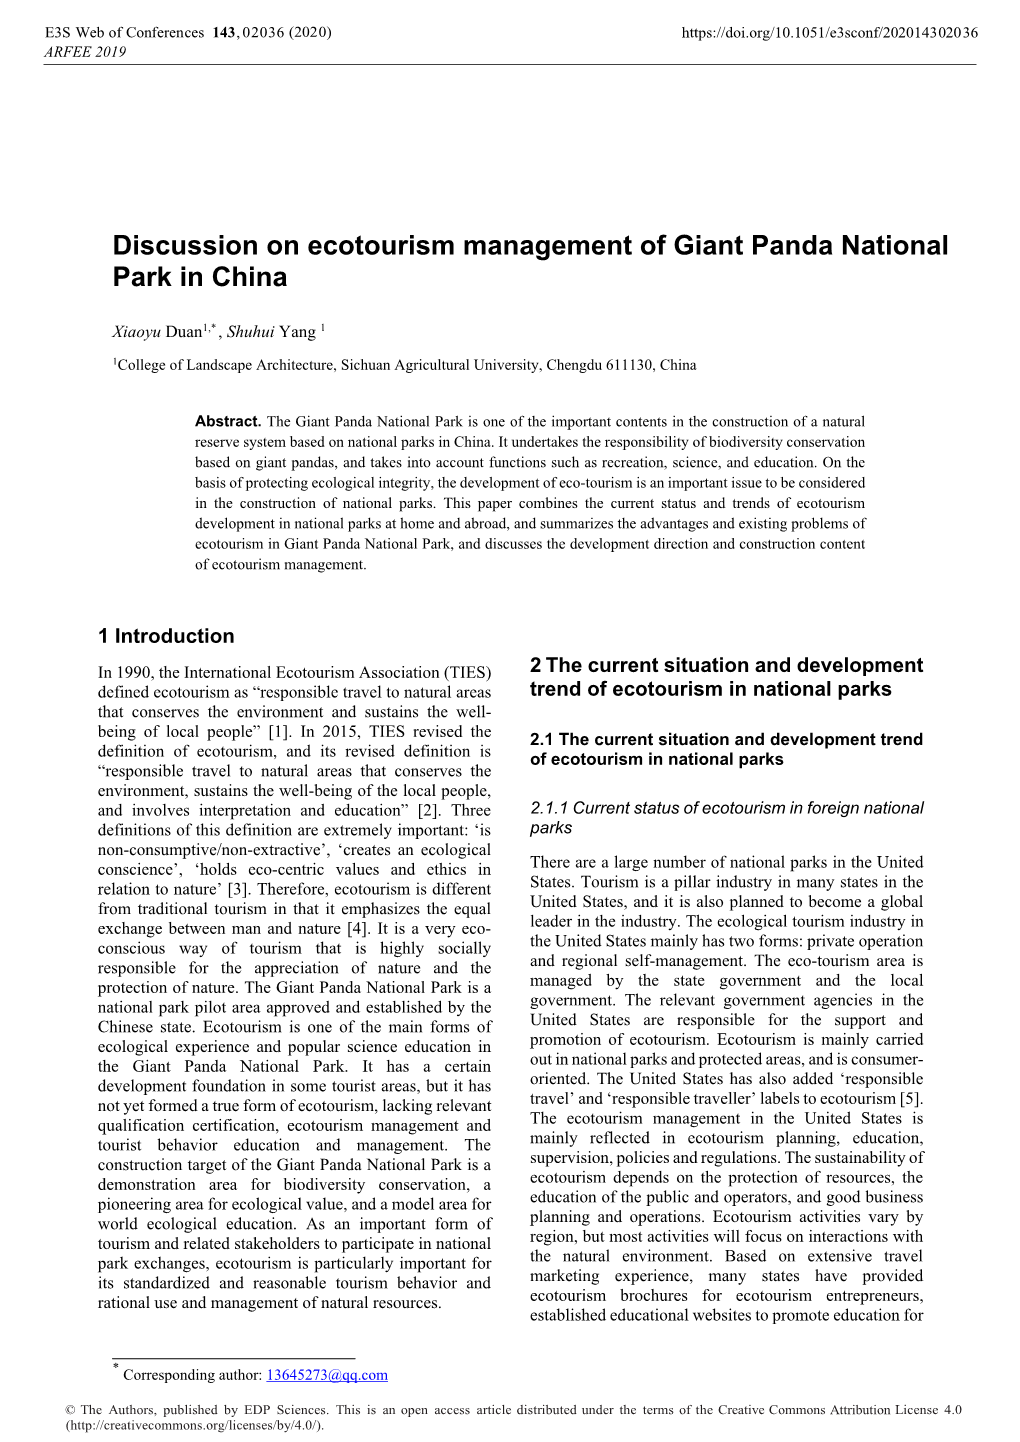 Discussion on Ecotourism Management of Giant Panda National Park in China